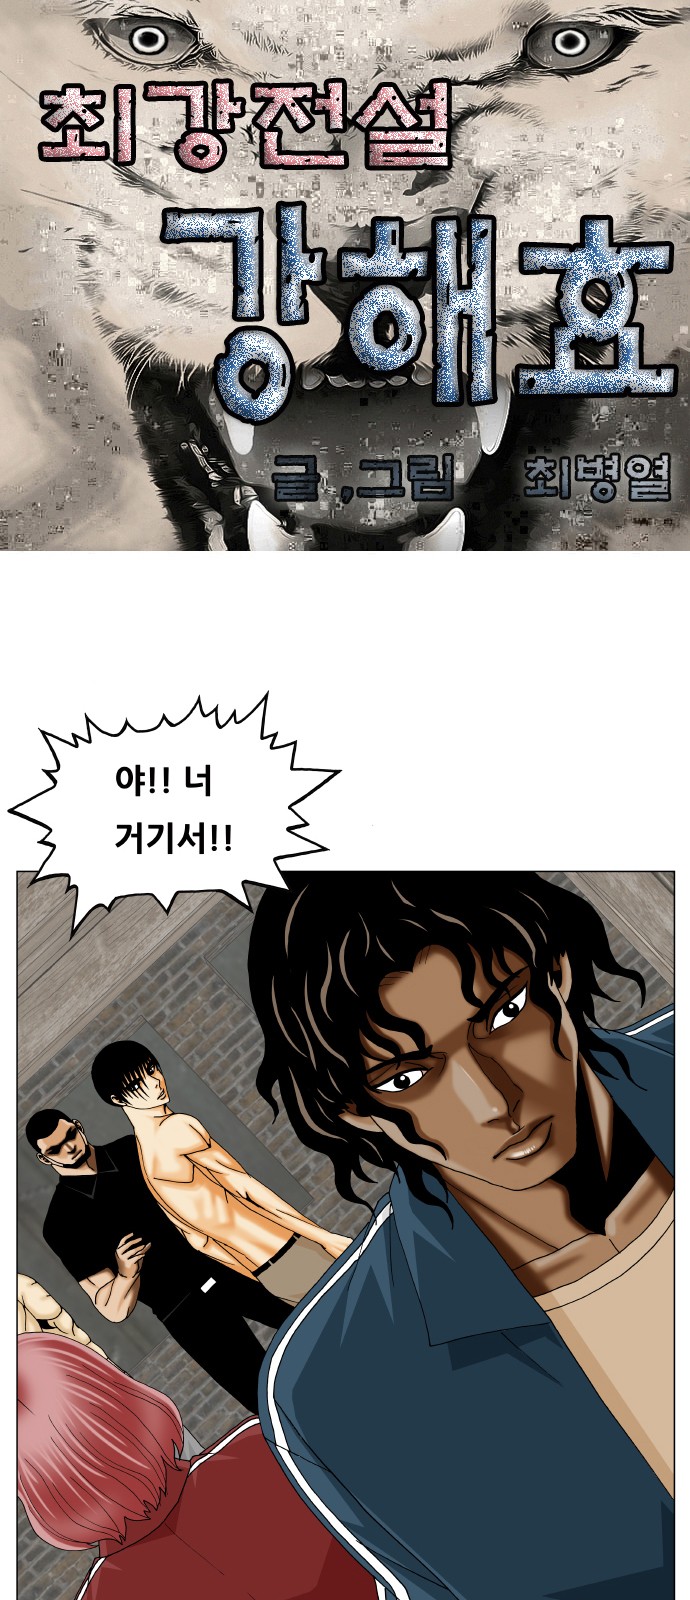 Ultimate Legend - Kang Hae Hyo - Chapter 386 - Page 1